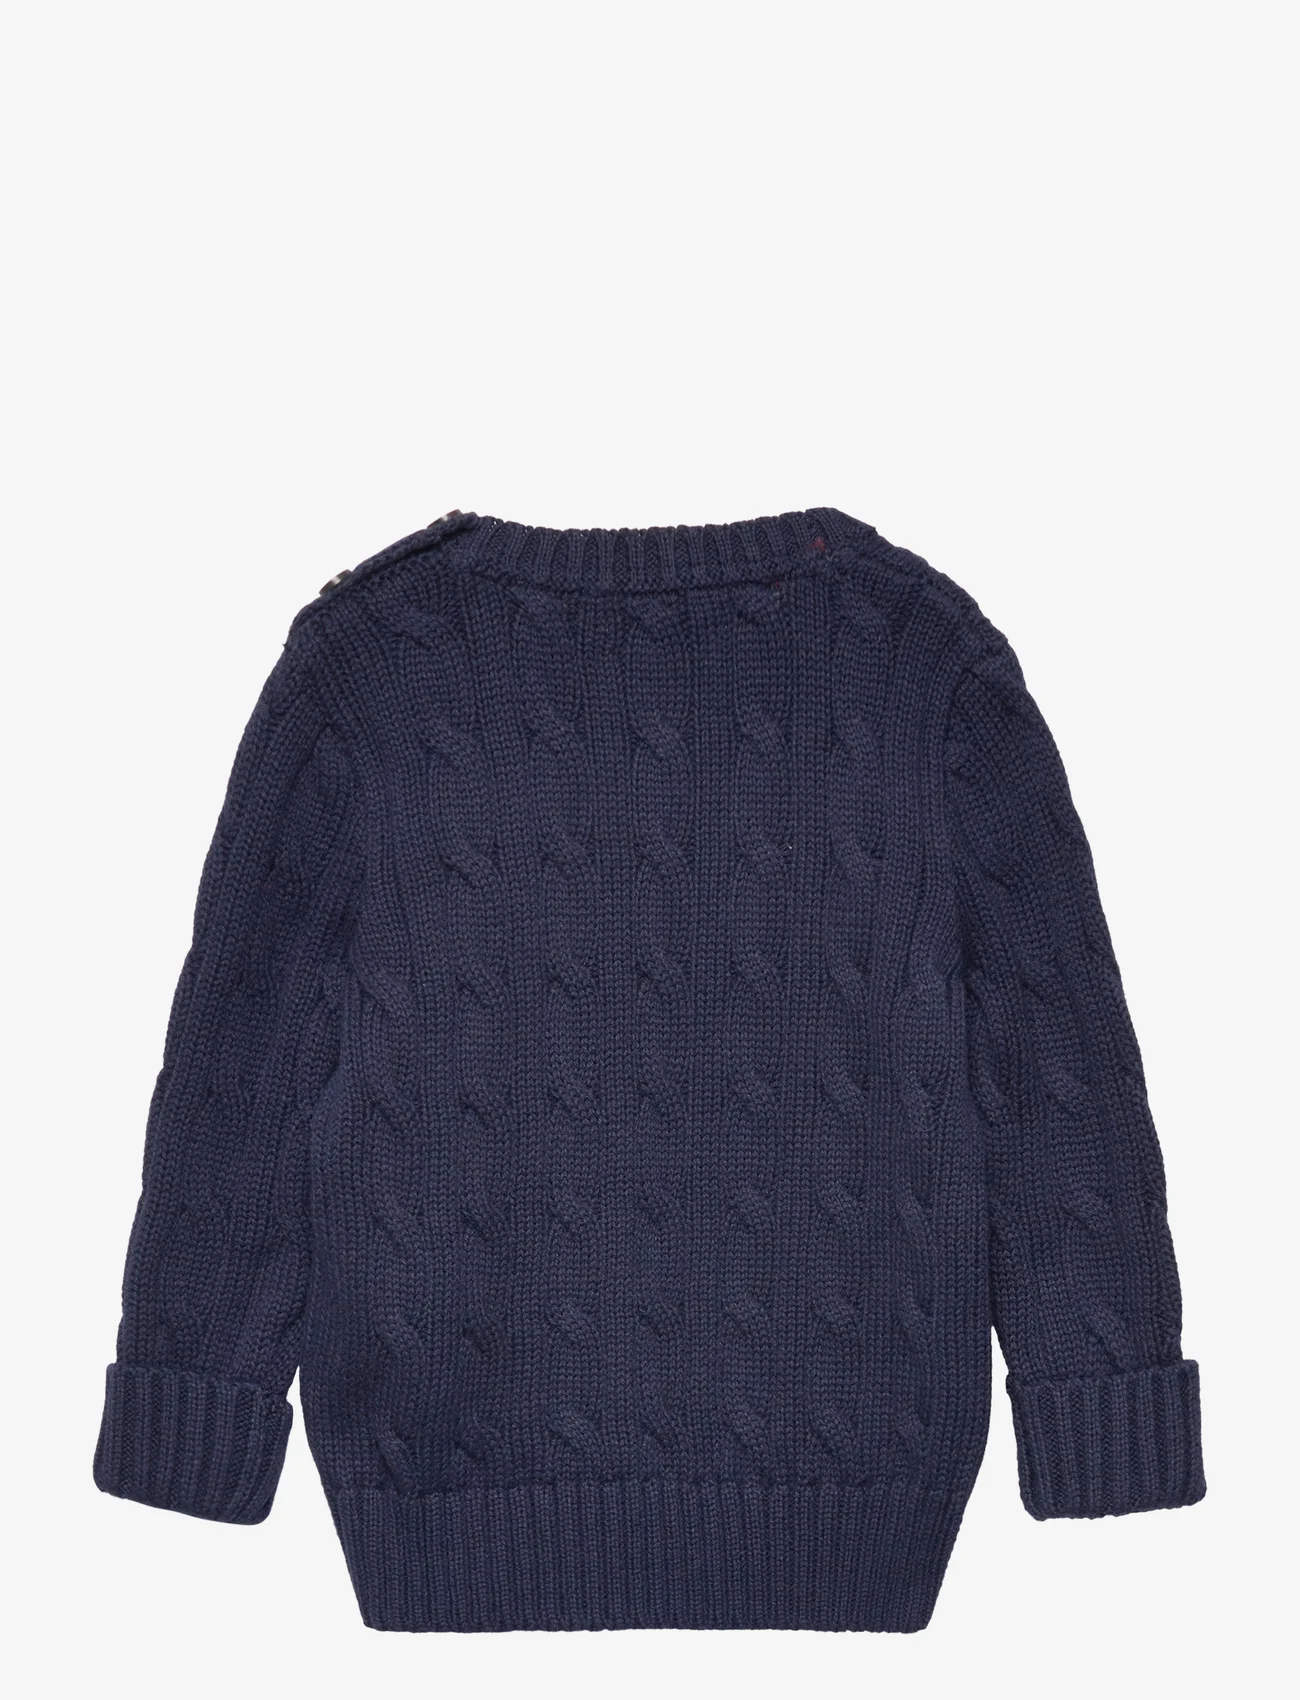 Ralph Lauren Baby - Cable-Knit Cotton Sweater - rl navy/c3822 - 1